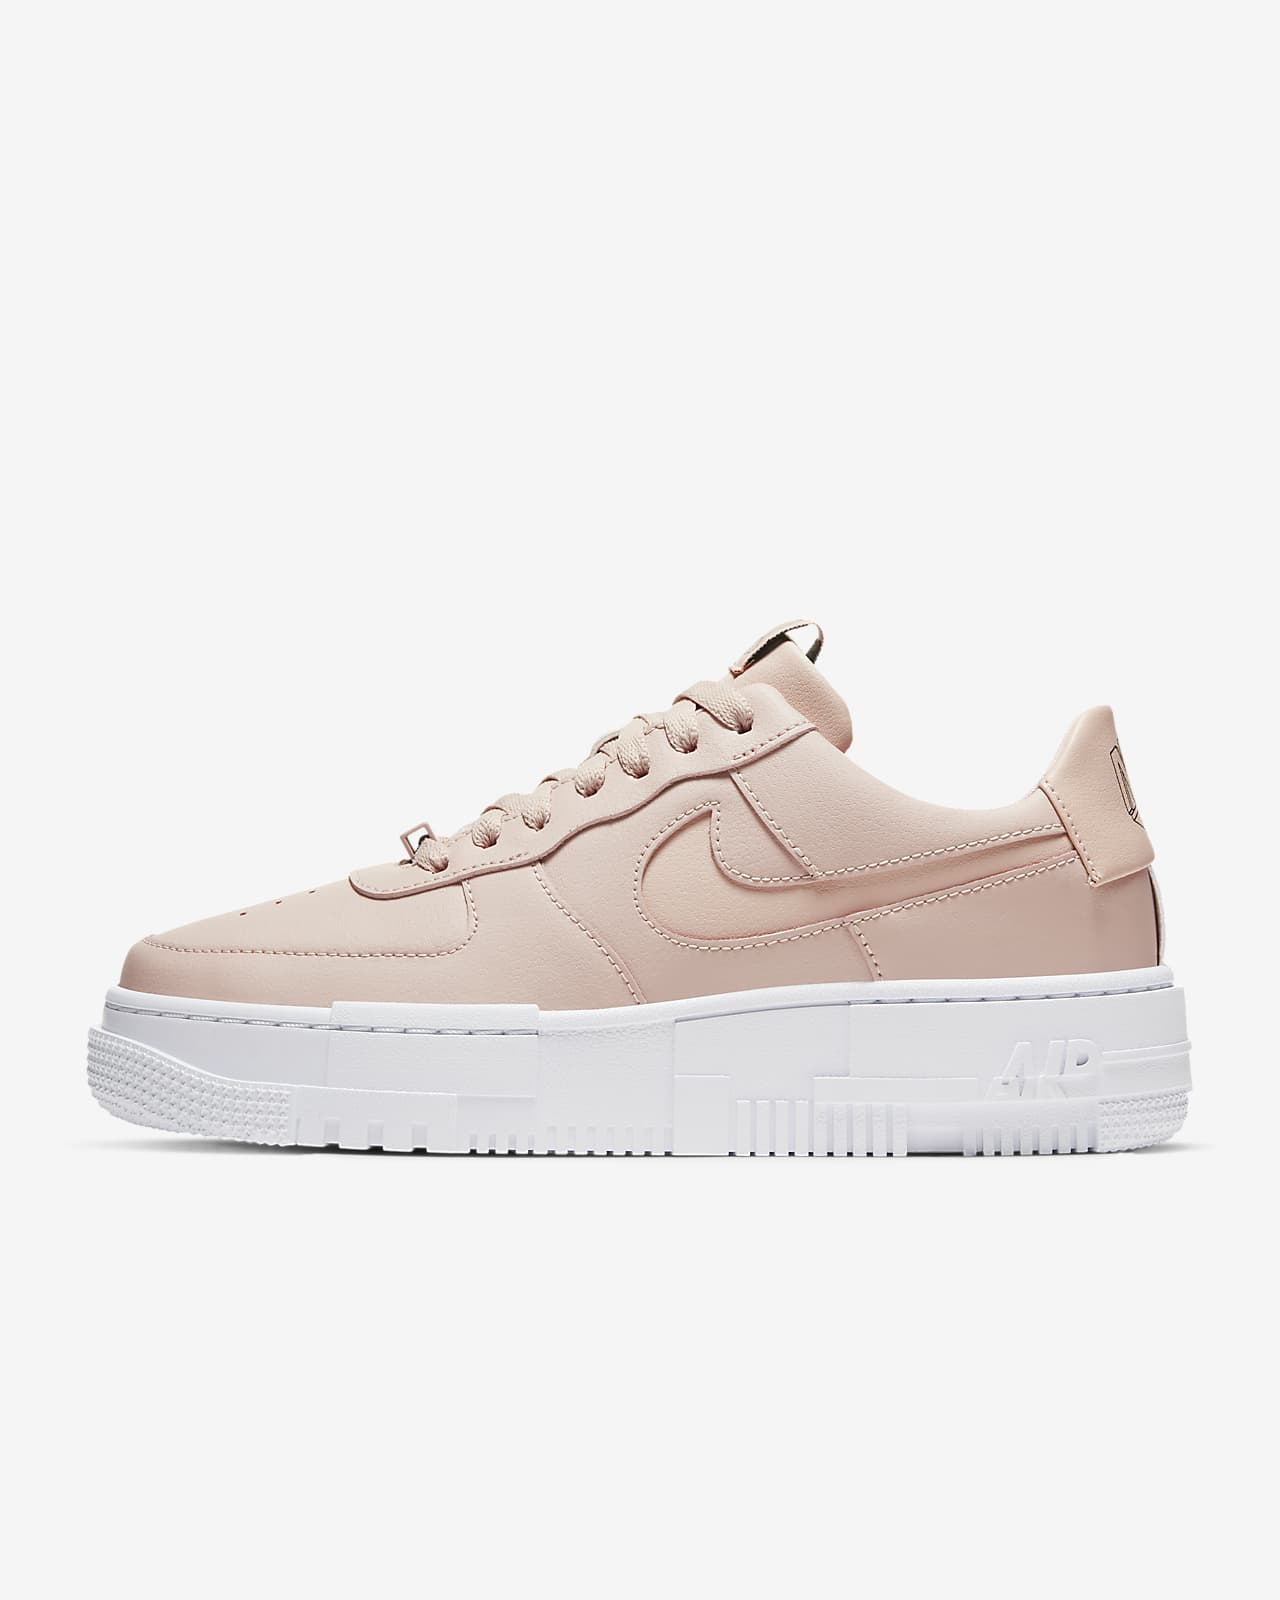 nike air force women's shoes on sale